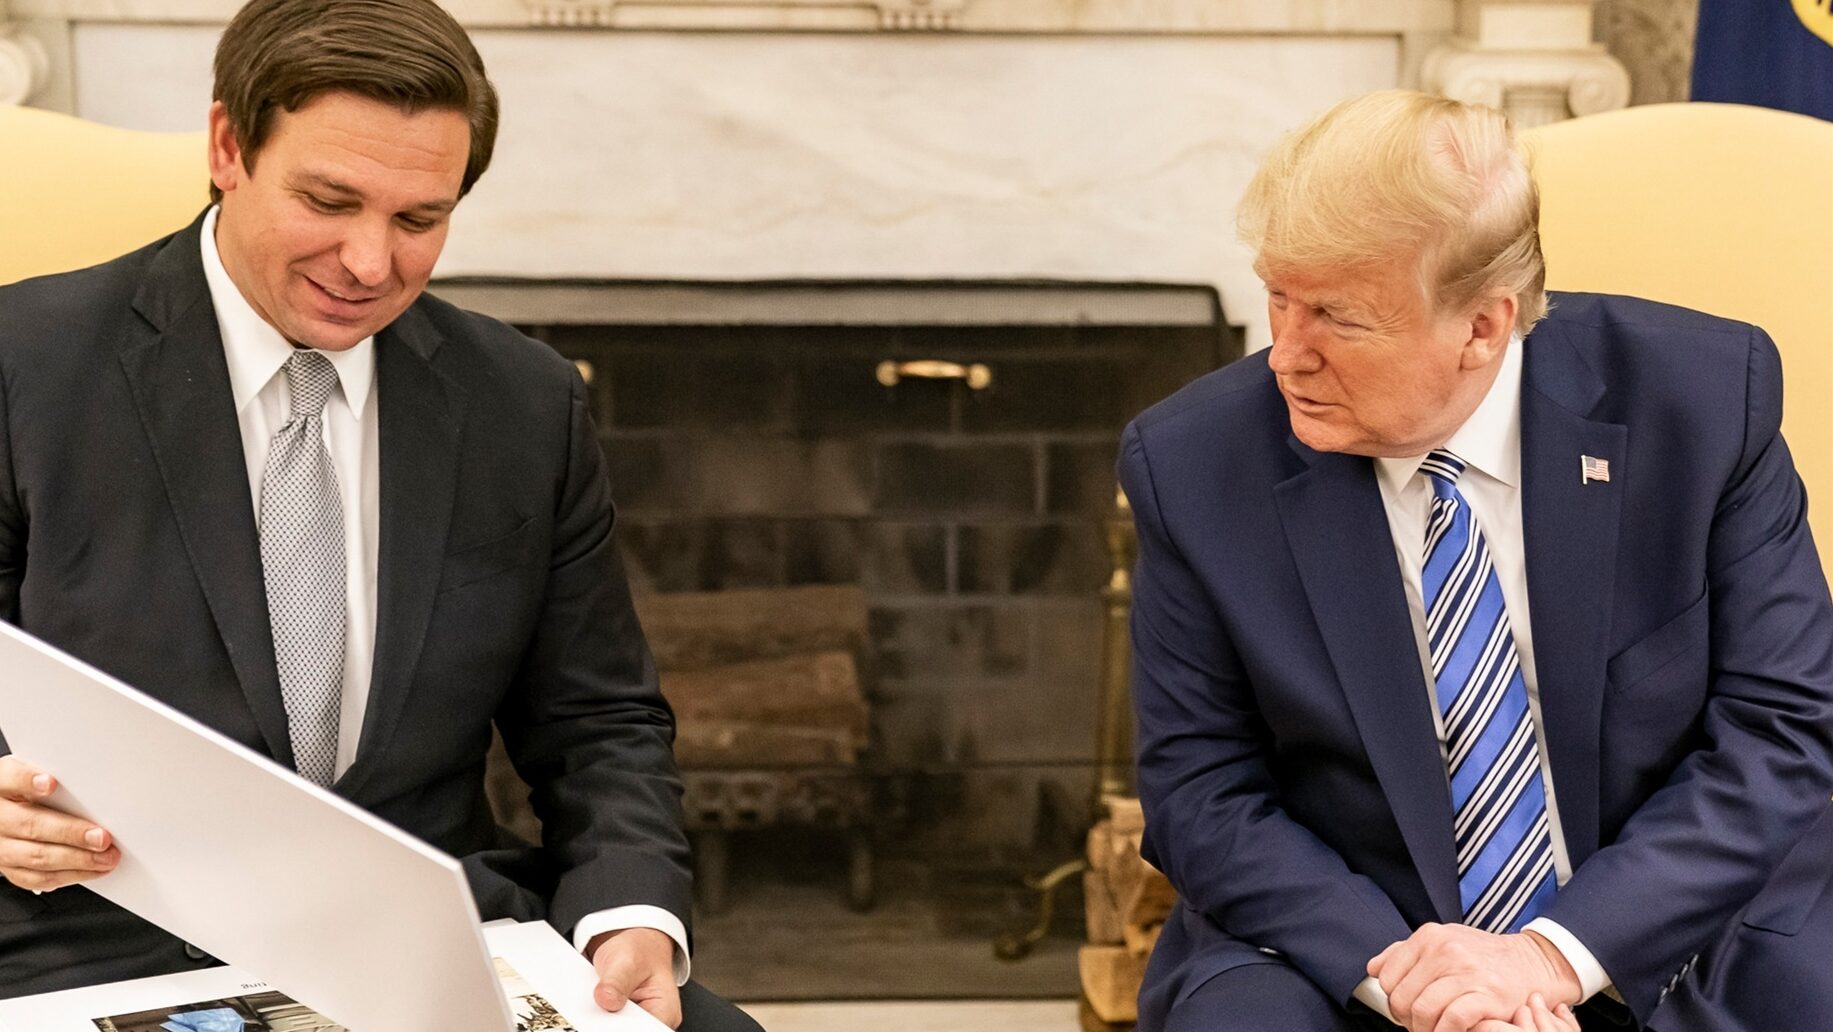 US President Trump meets with Governor of DeSantis in Washington